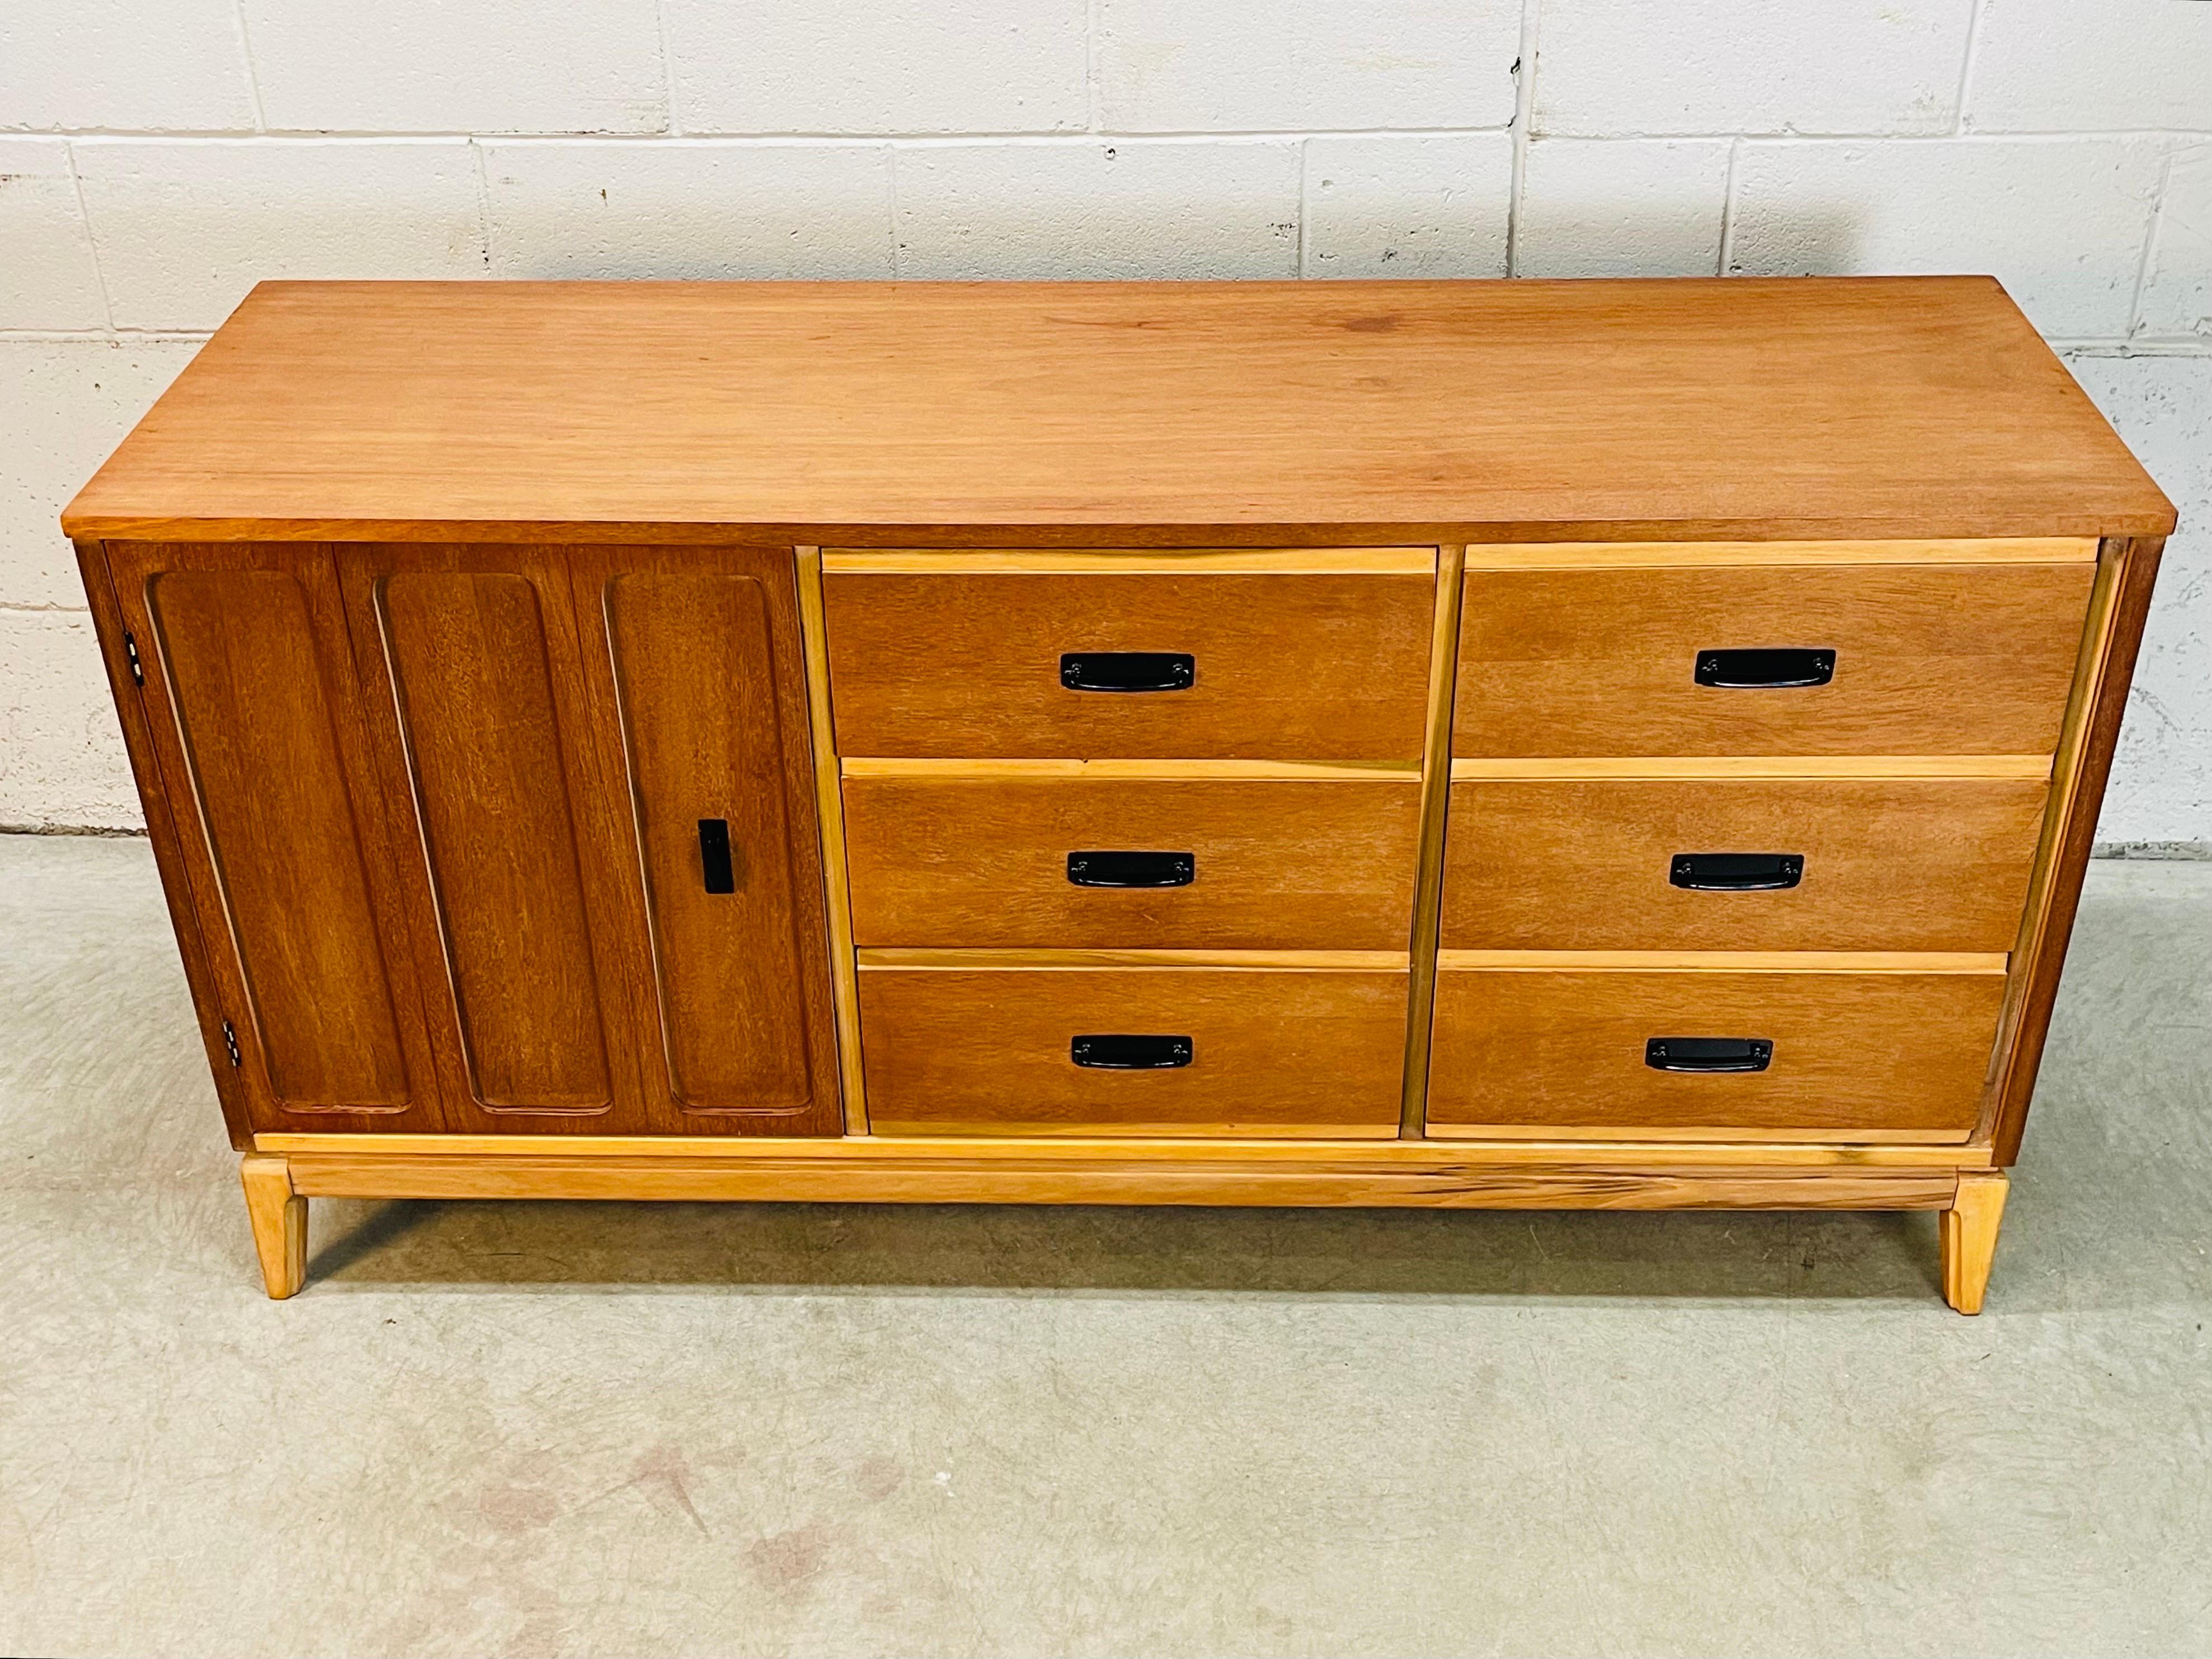 Vintage 1960s Mainline by Hooker Furniture low dresser with nine drawers. The dresser is a mix of walnut and ash woods. The drawers measure 5”H and is marked inside the drawer. The dresser is solid and sturdy. Newly refinished condition.